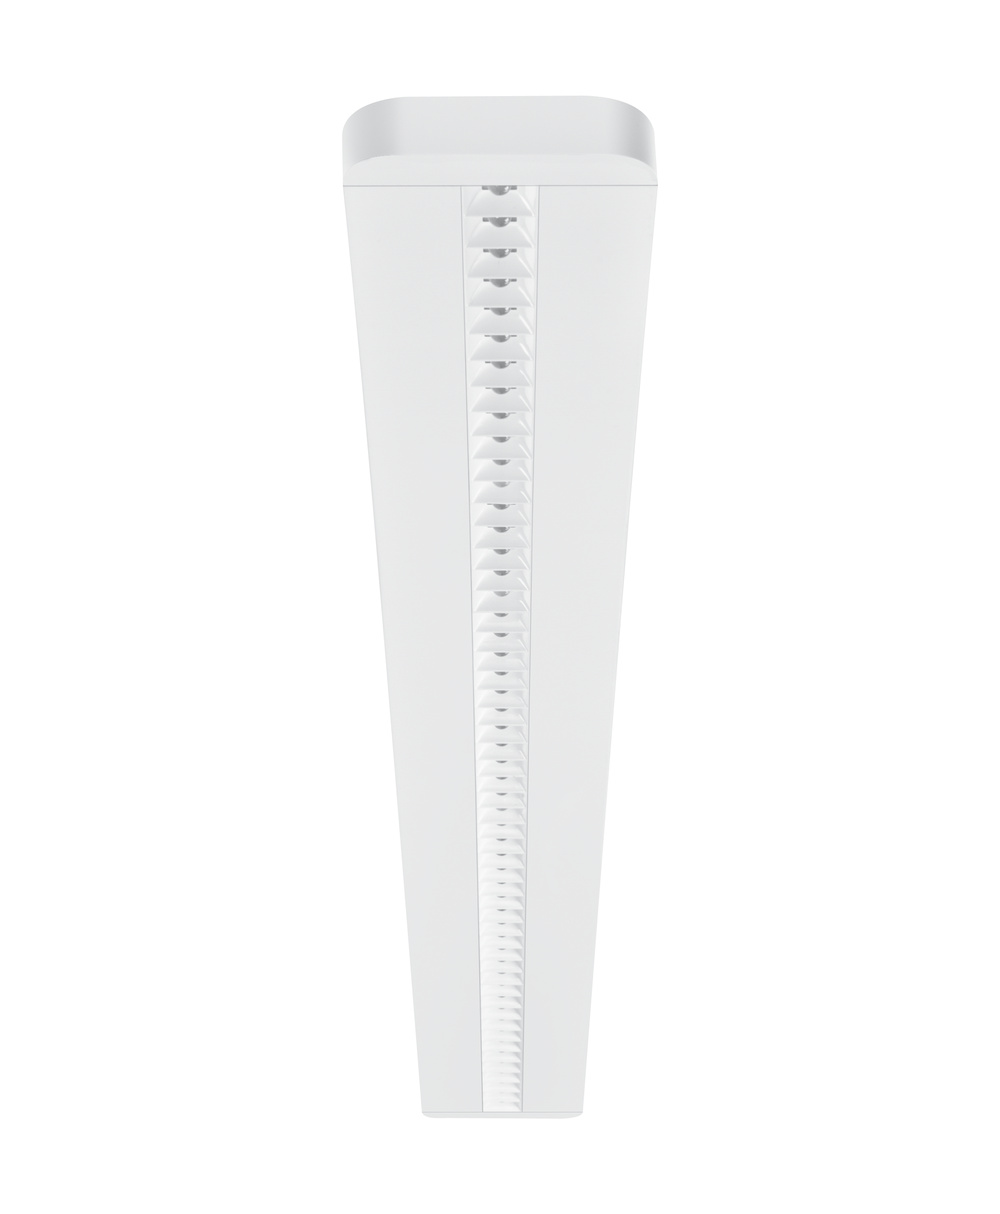 Ledvance LED linear luminaire LINEAR IndiviLED DIRECT 1500 25 W 940